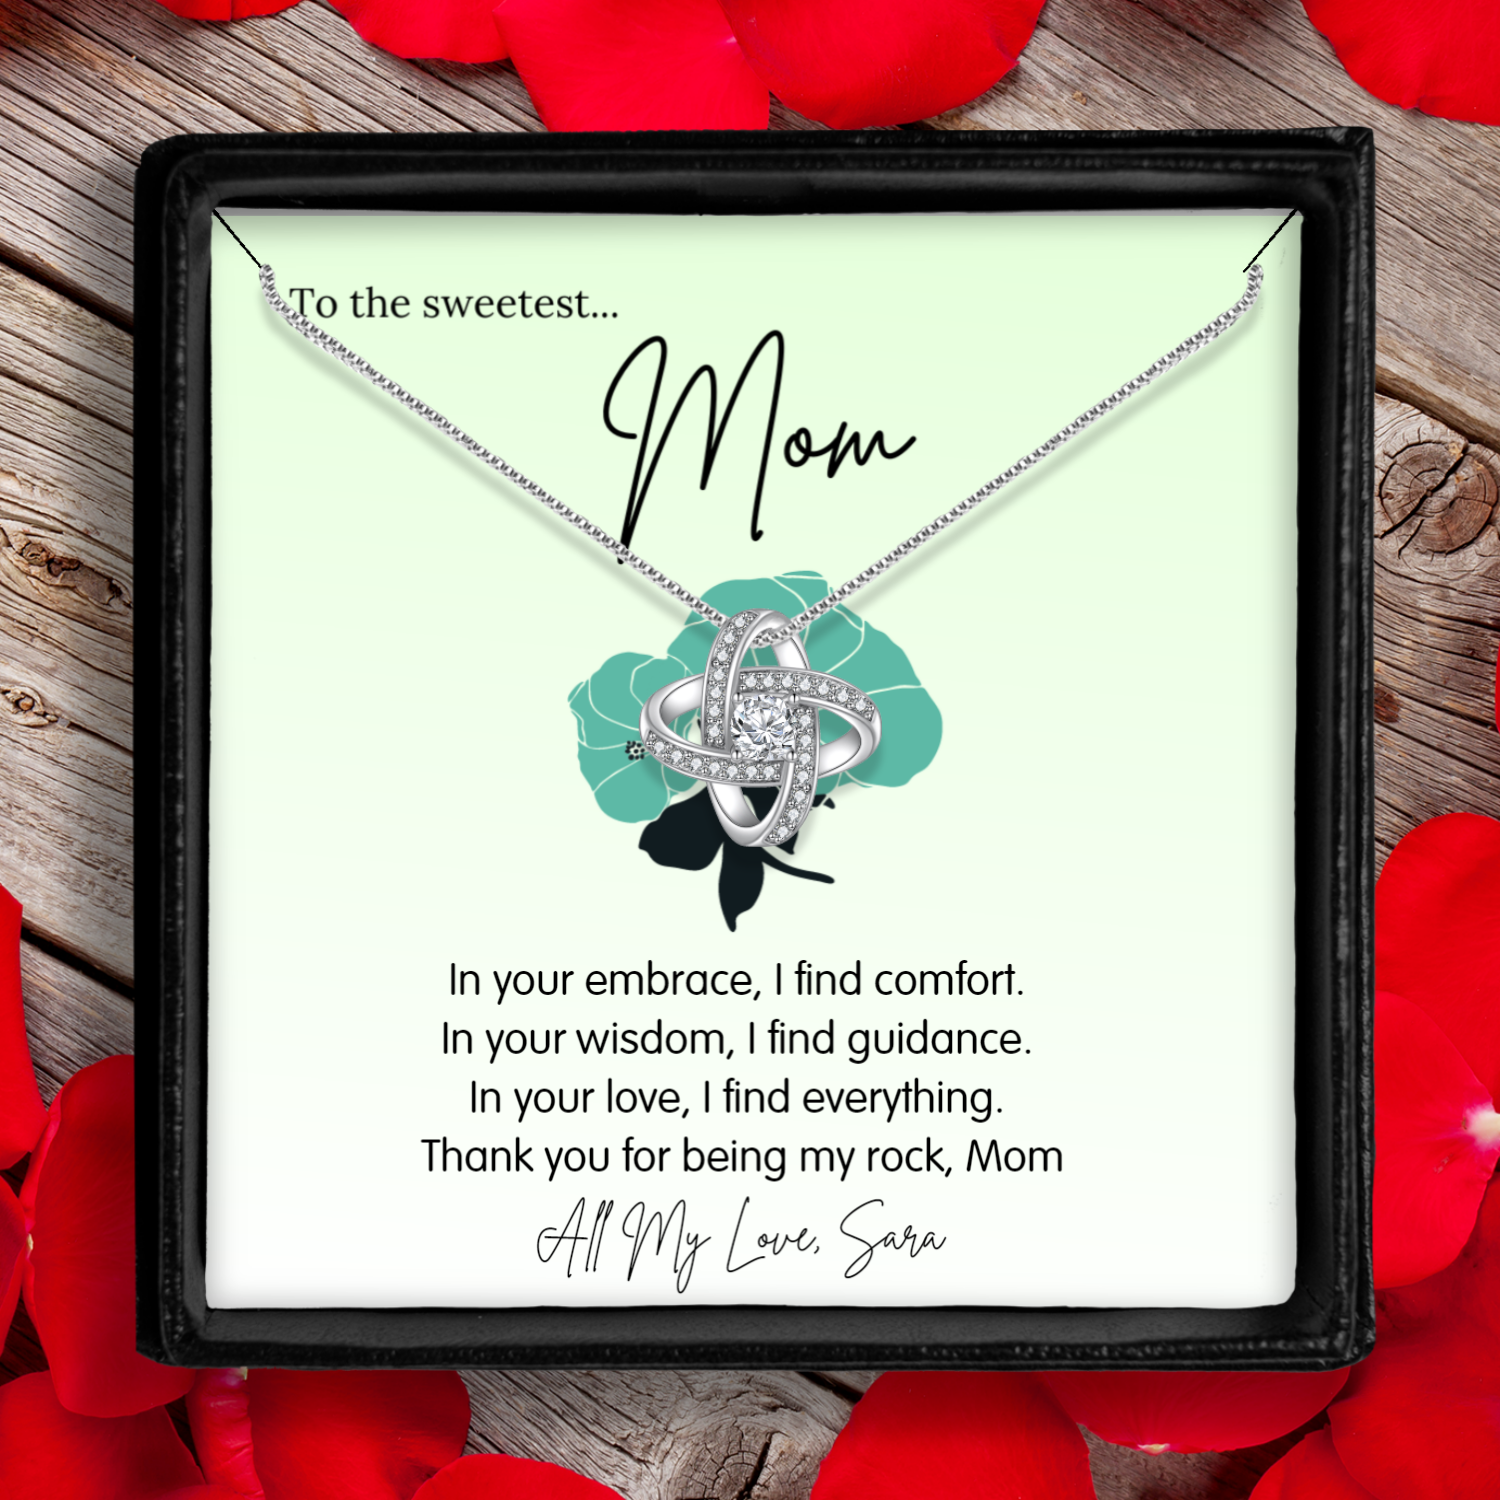 Personalized Necklaces + Message Cards - Love Knot Necklace + Custom Mom Card 